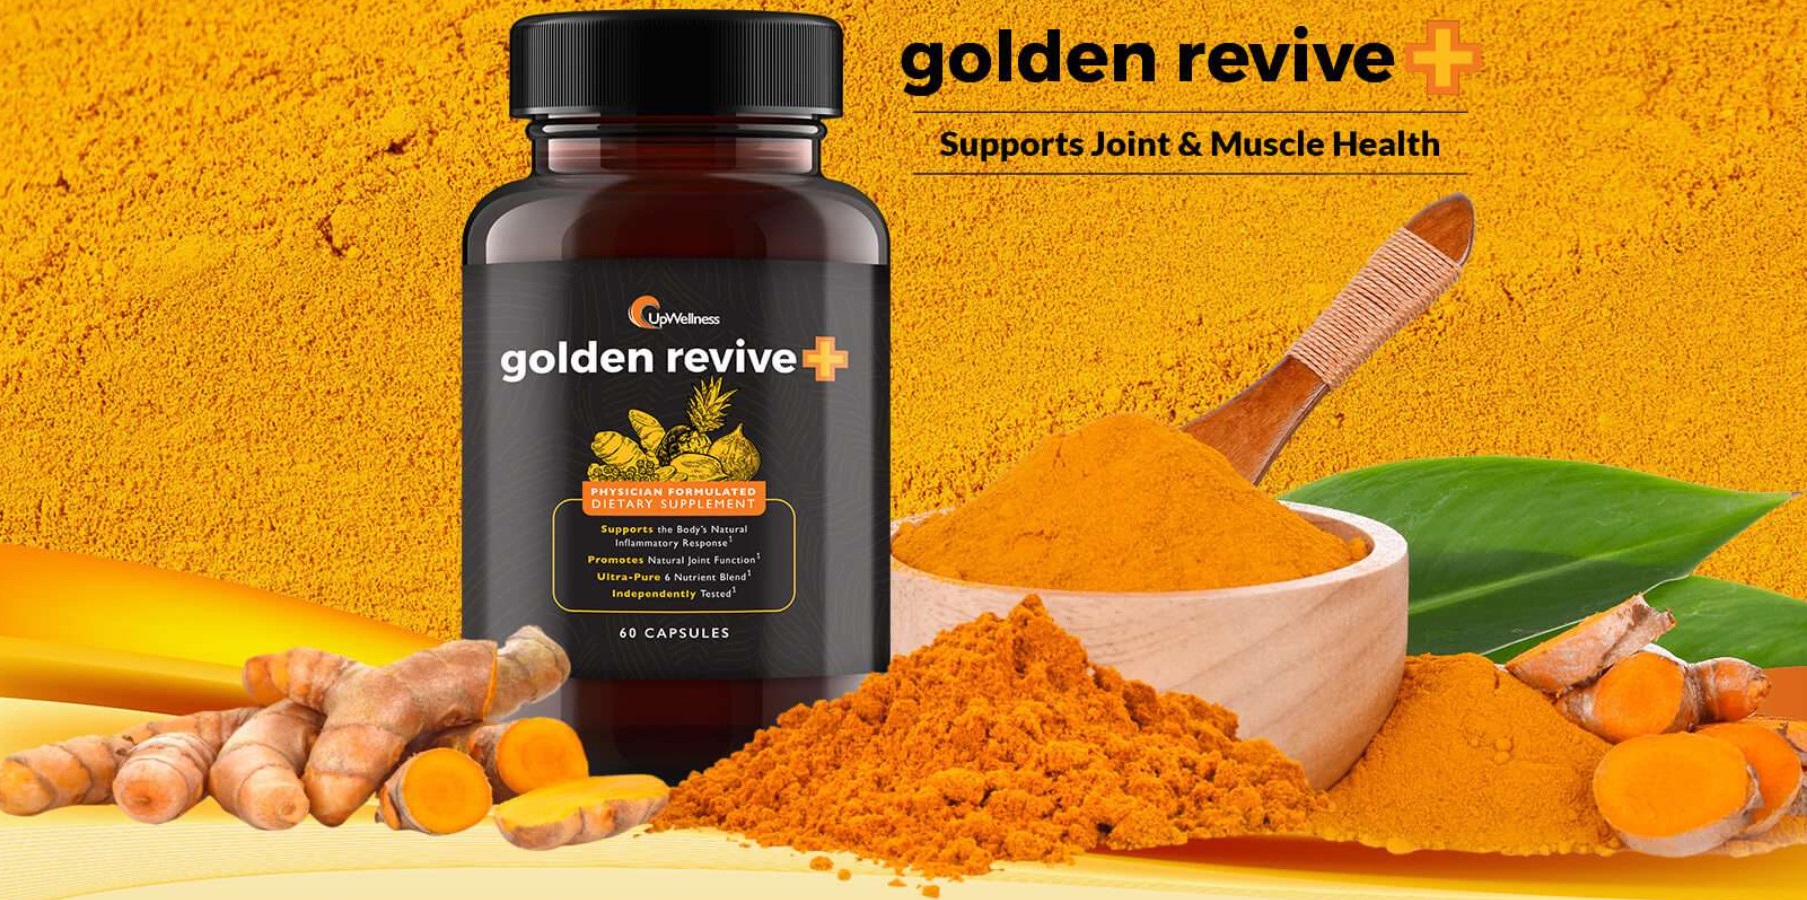 UpWellness Golden Revive+ Support Joint And Muscle Pain